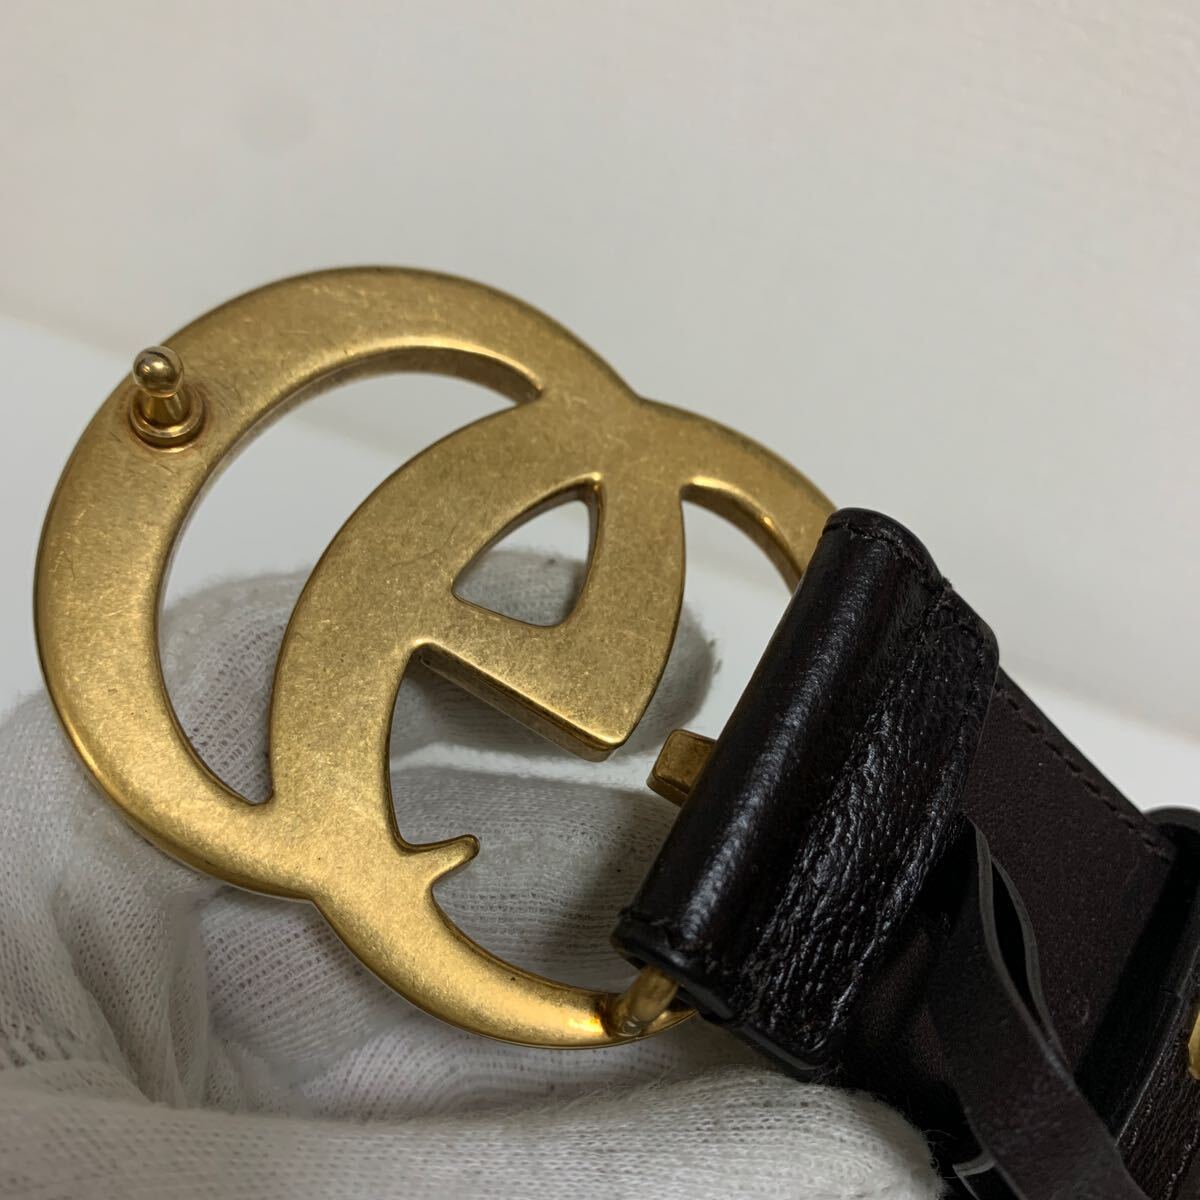  usage little beautiful goods GUCCI Gucci GGma-monto leather belt double G buckle Gold Brown 